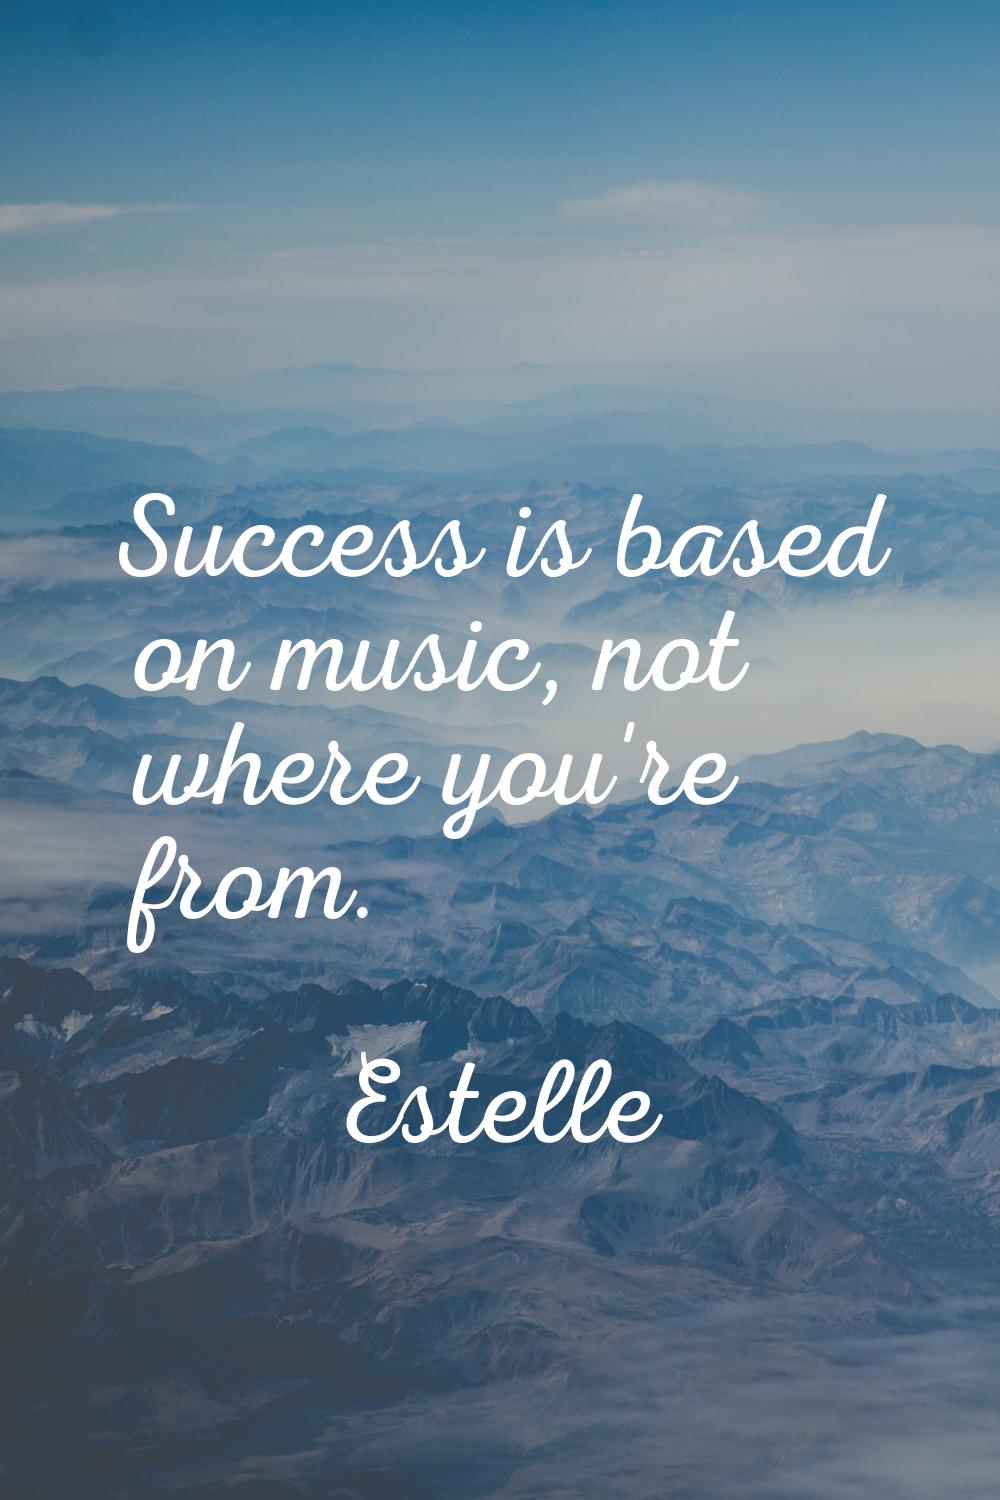 Success is based on music, not where you're from.